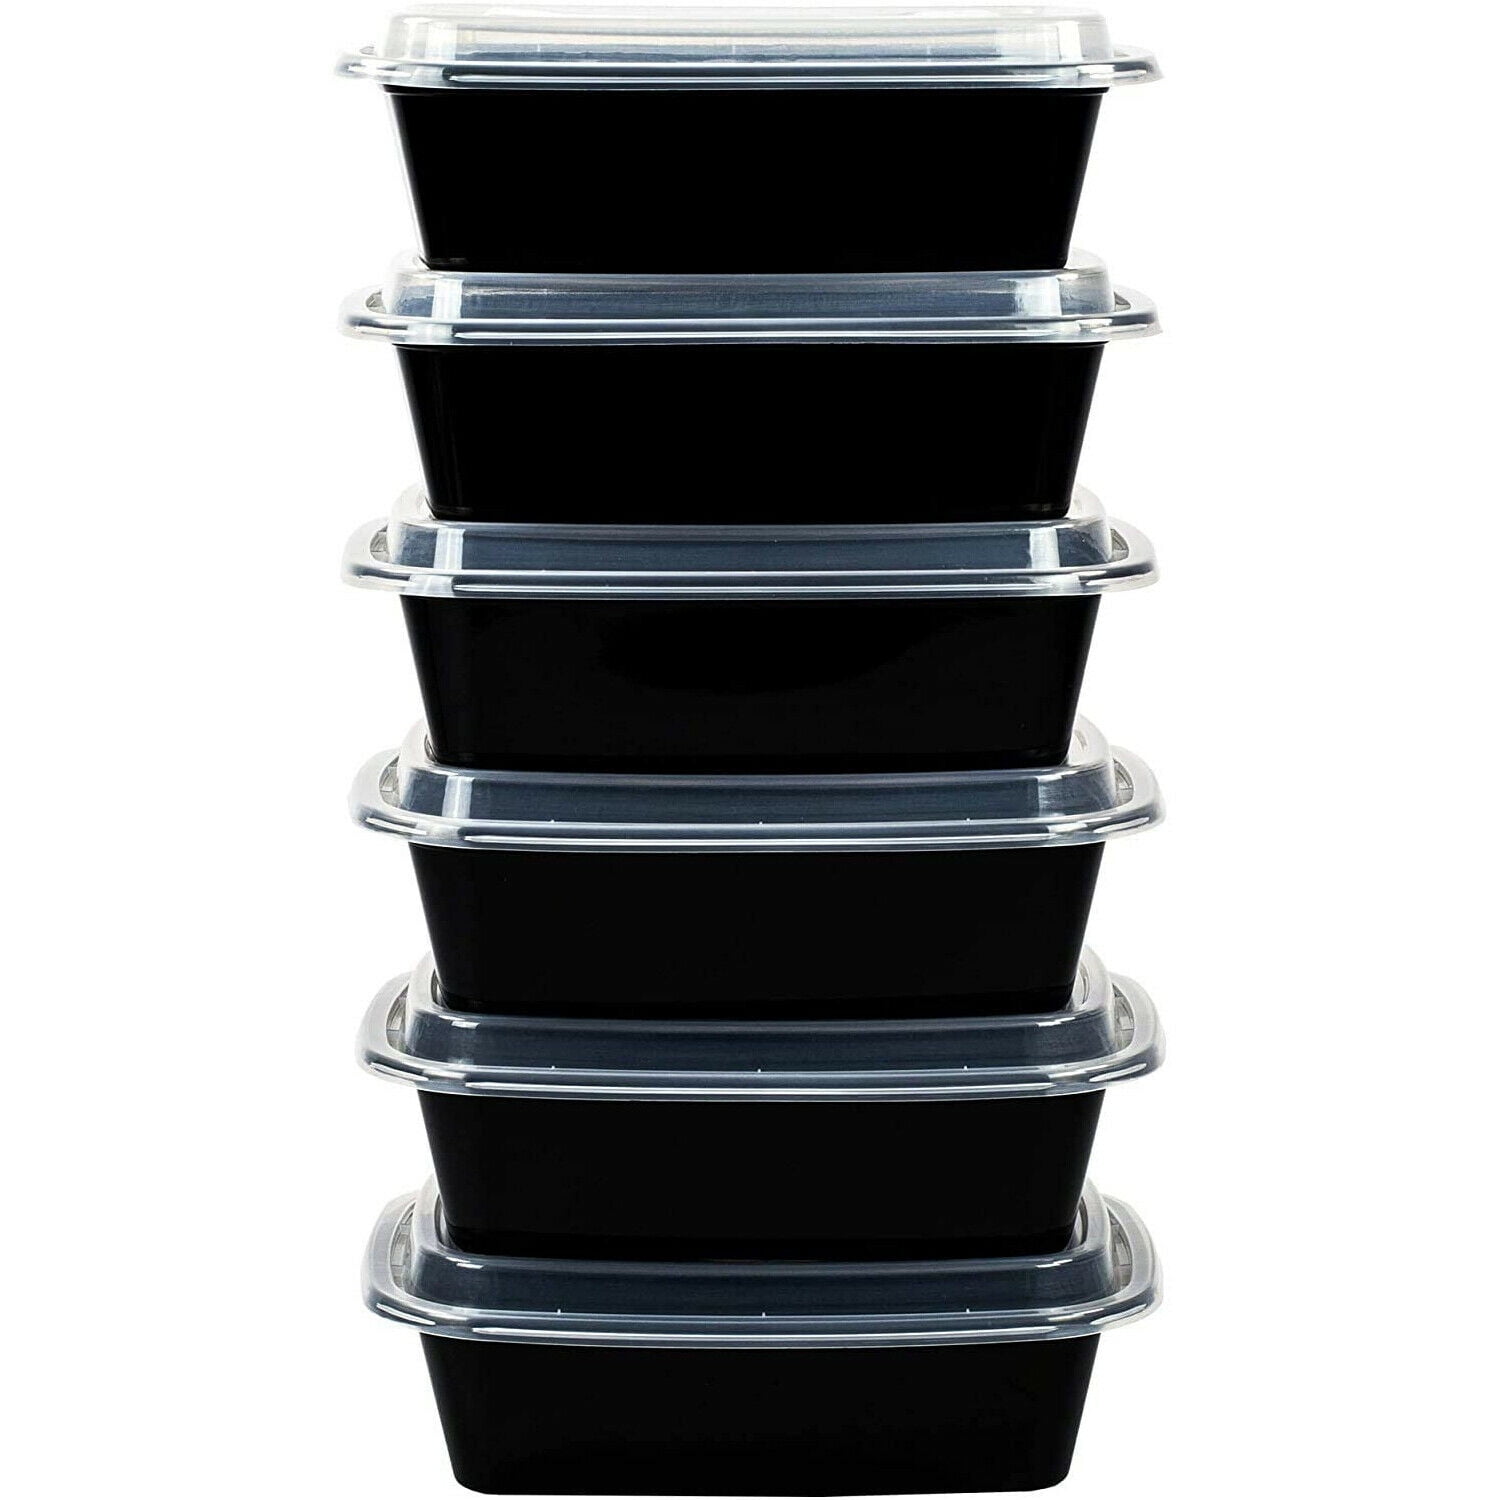  Azure Zone, [38 oz. 45-Pack Round Meal Prep Food Container  with Lid - Disposable Bowls - Stackable - Freezer/Microwave/Dishwasher Safe  - Reusable Storage - Portable - BPA Free - Bento Box